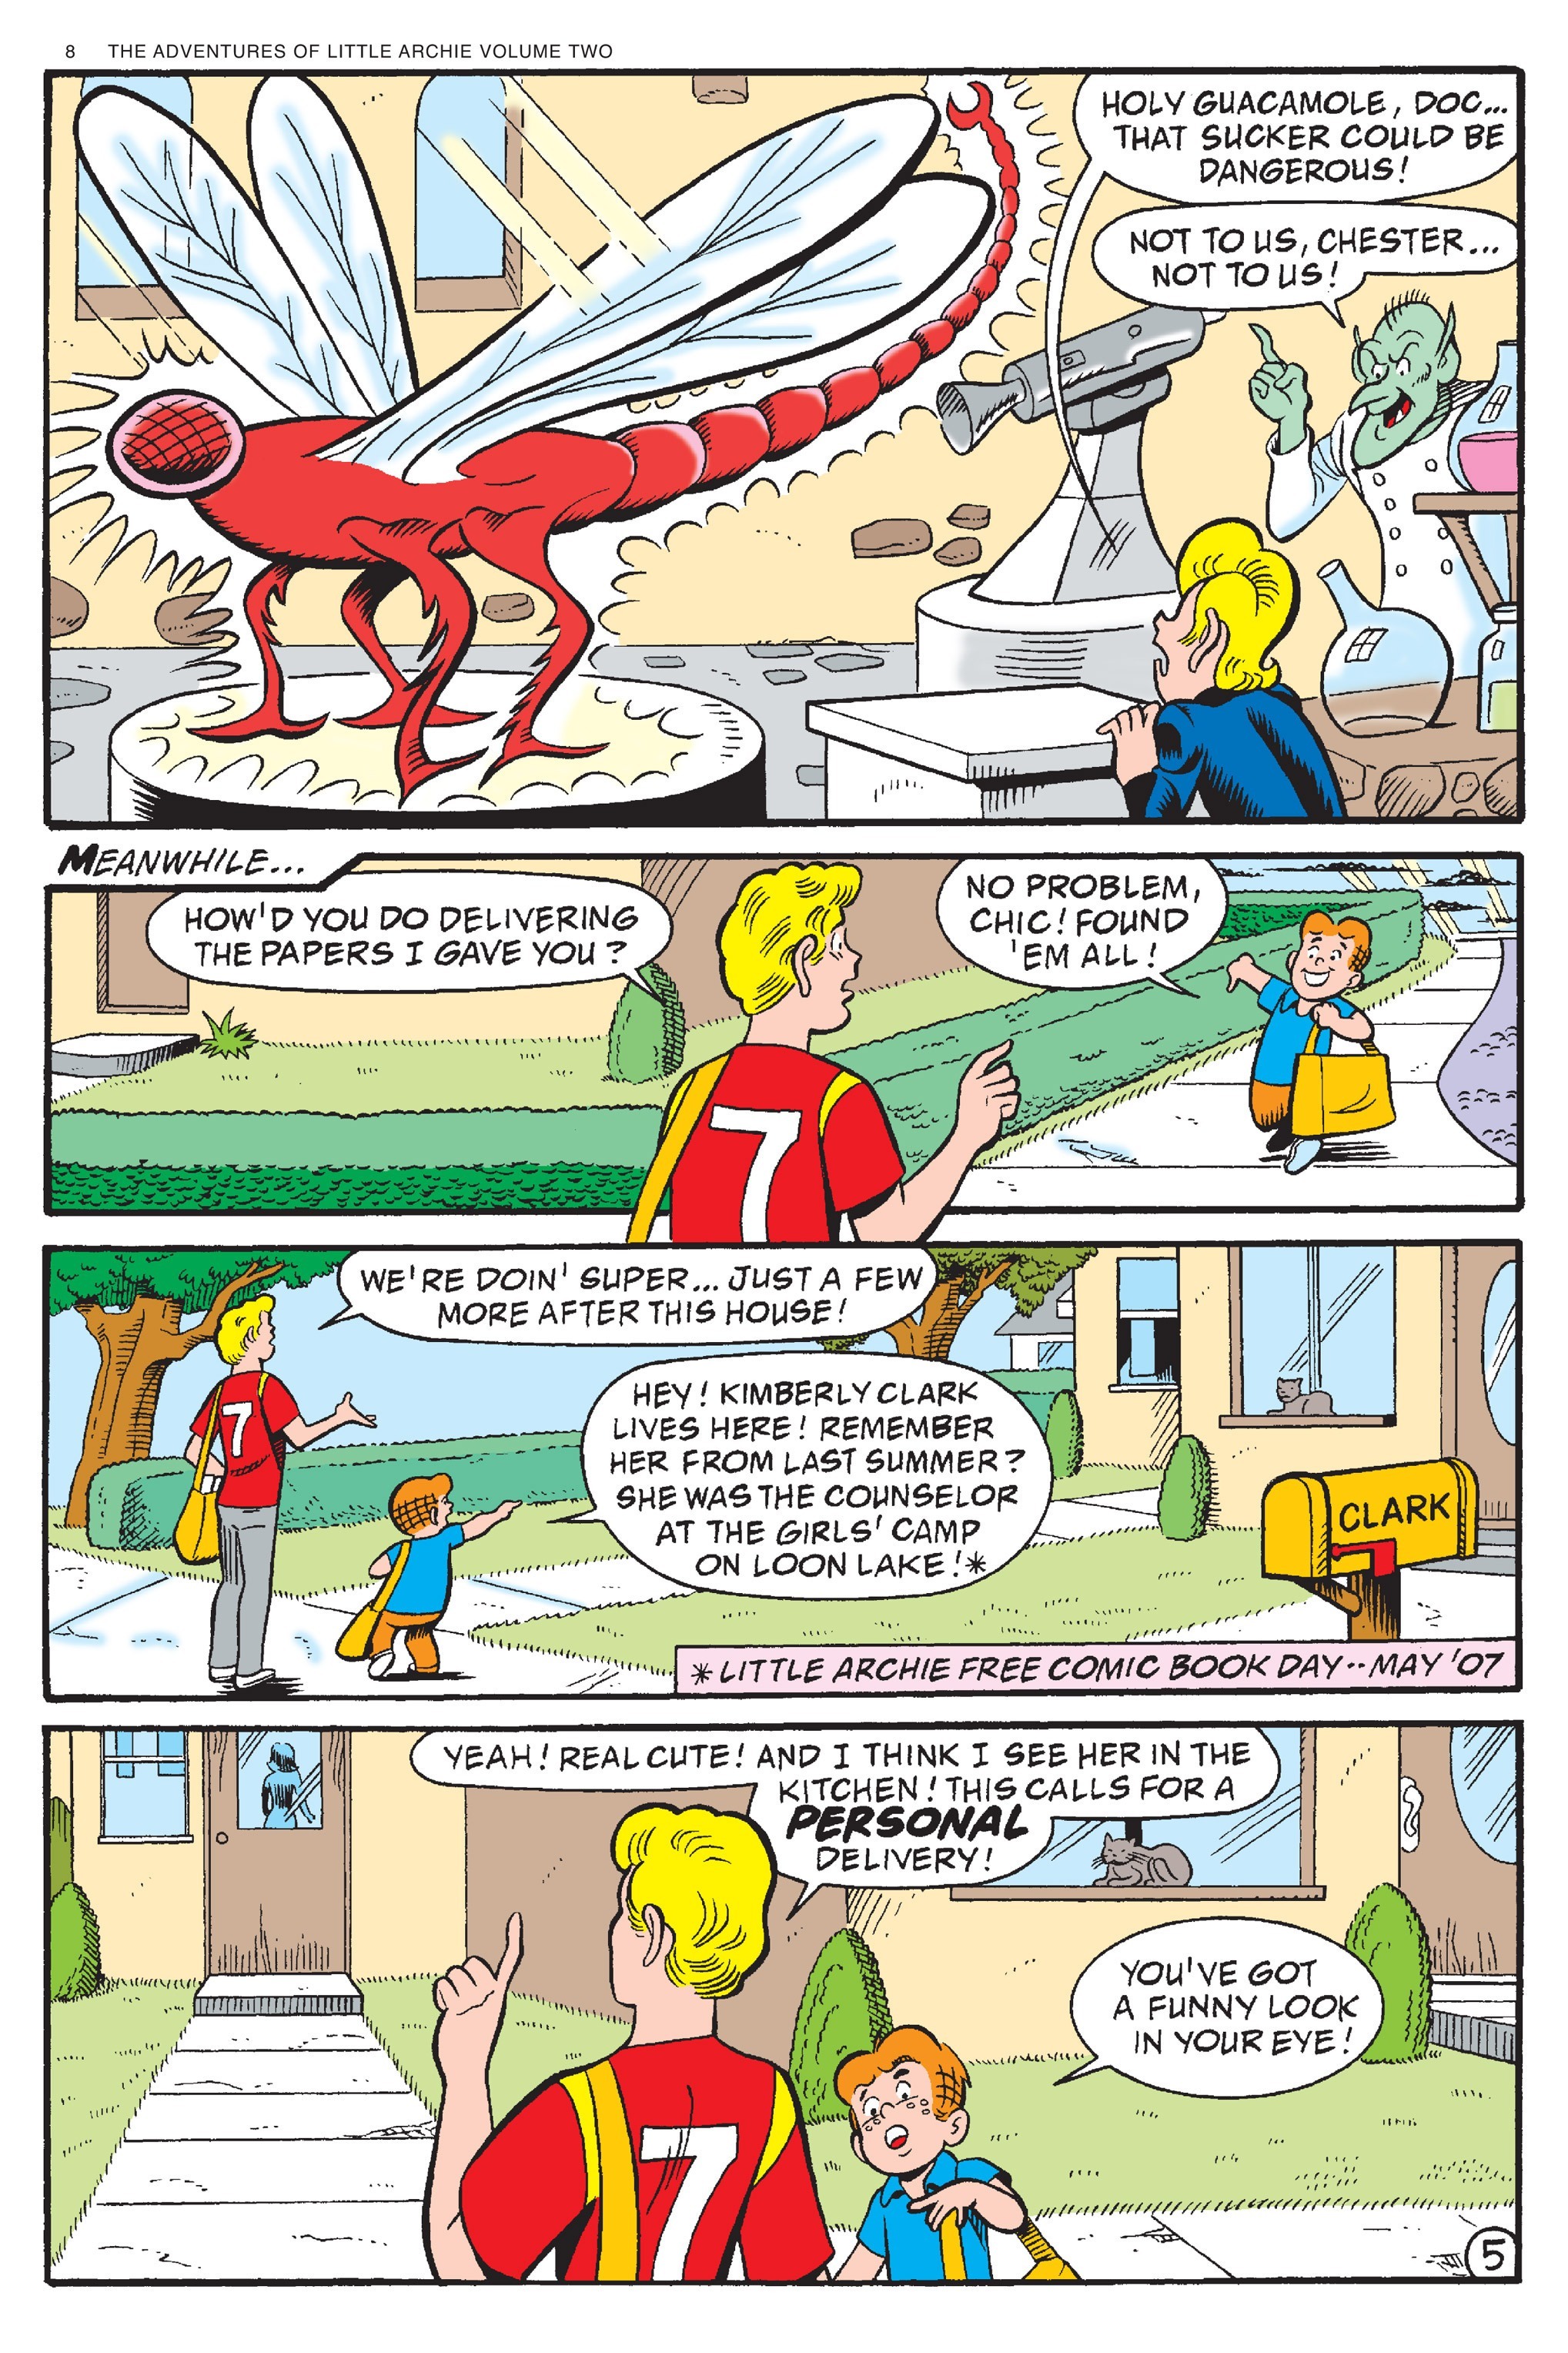 Read online Adventures of Little Archie comic -  Issue # TPB 2 - 9